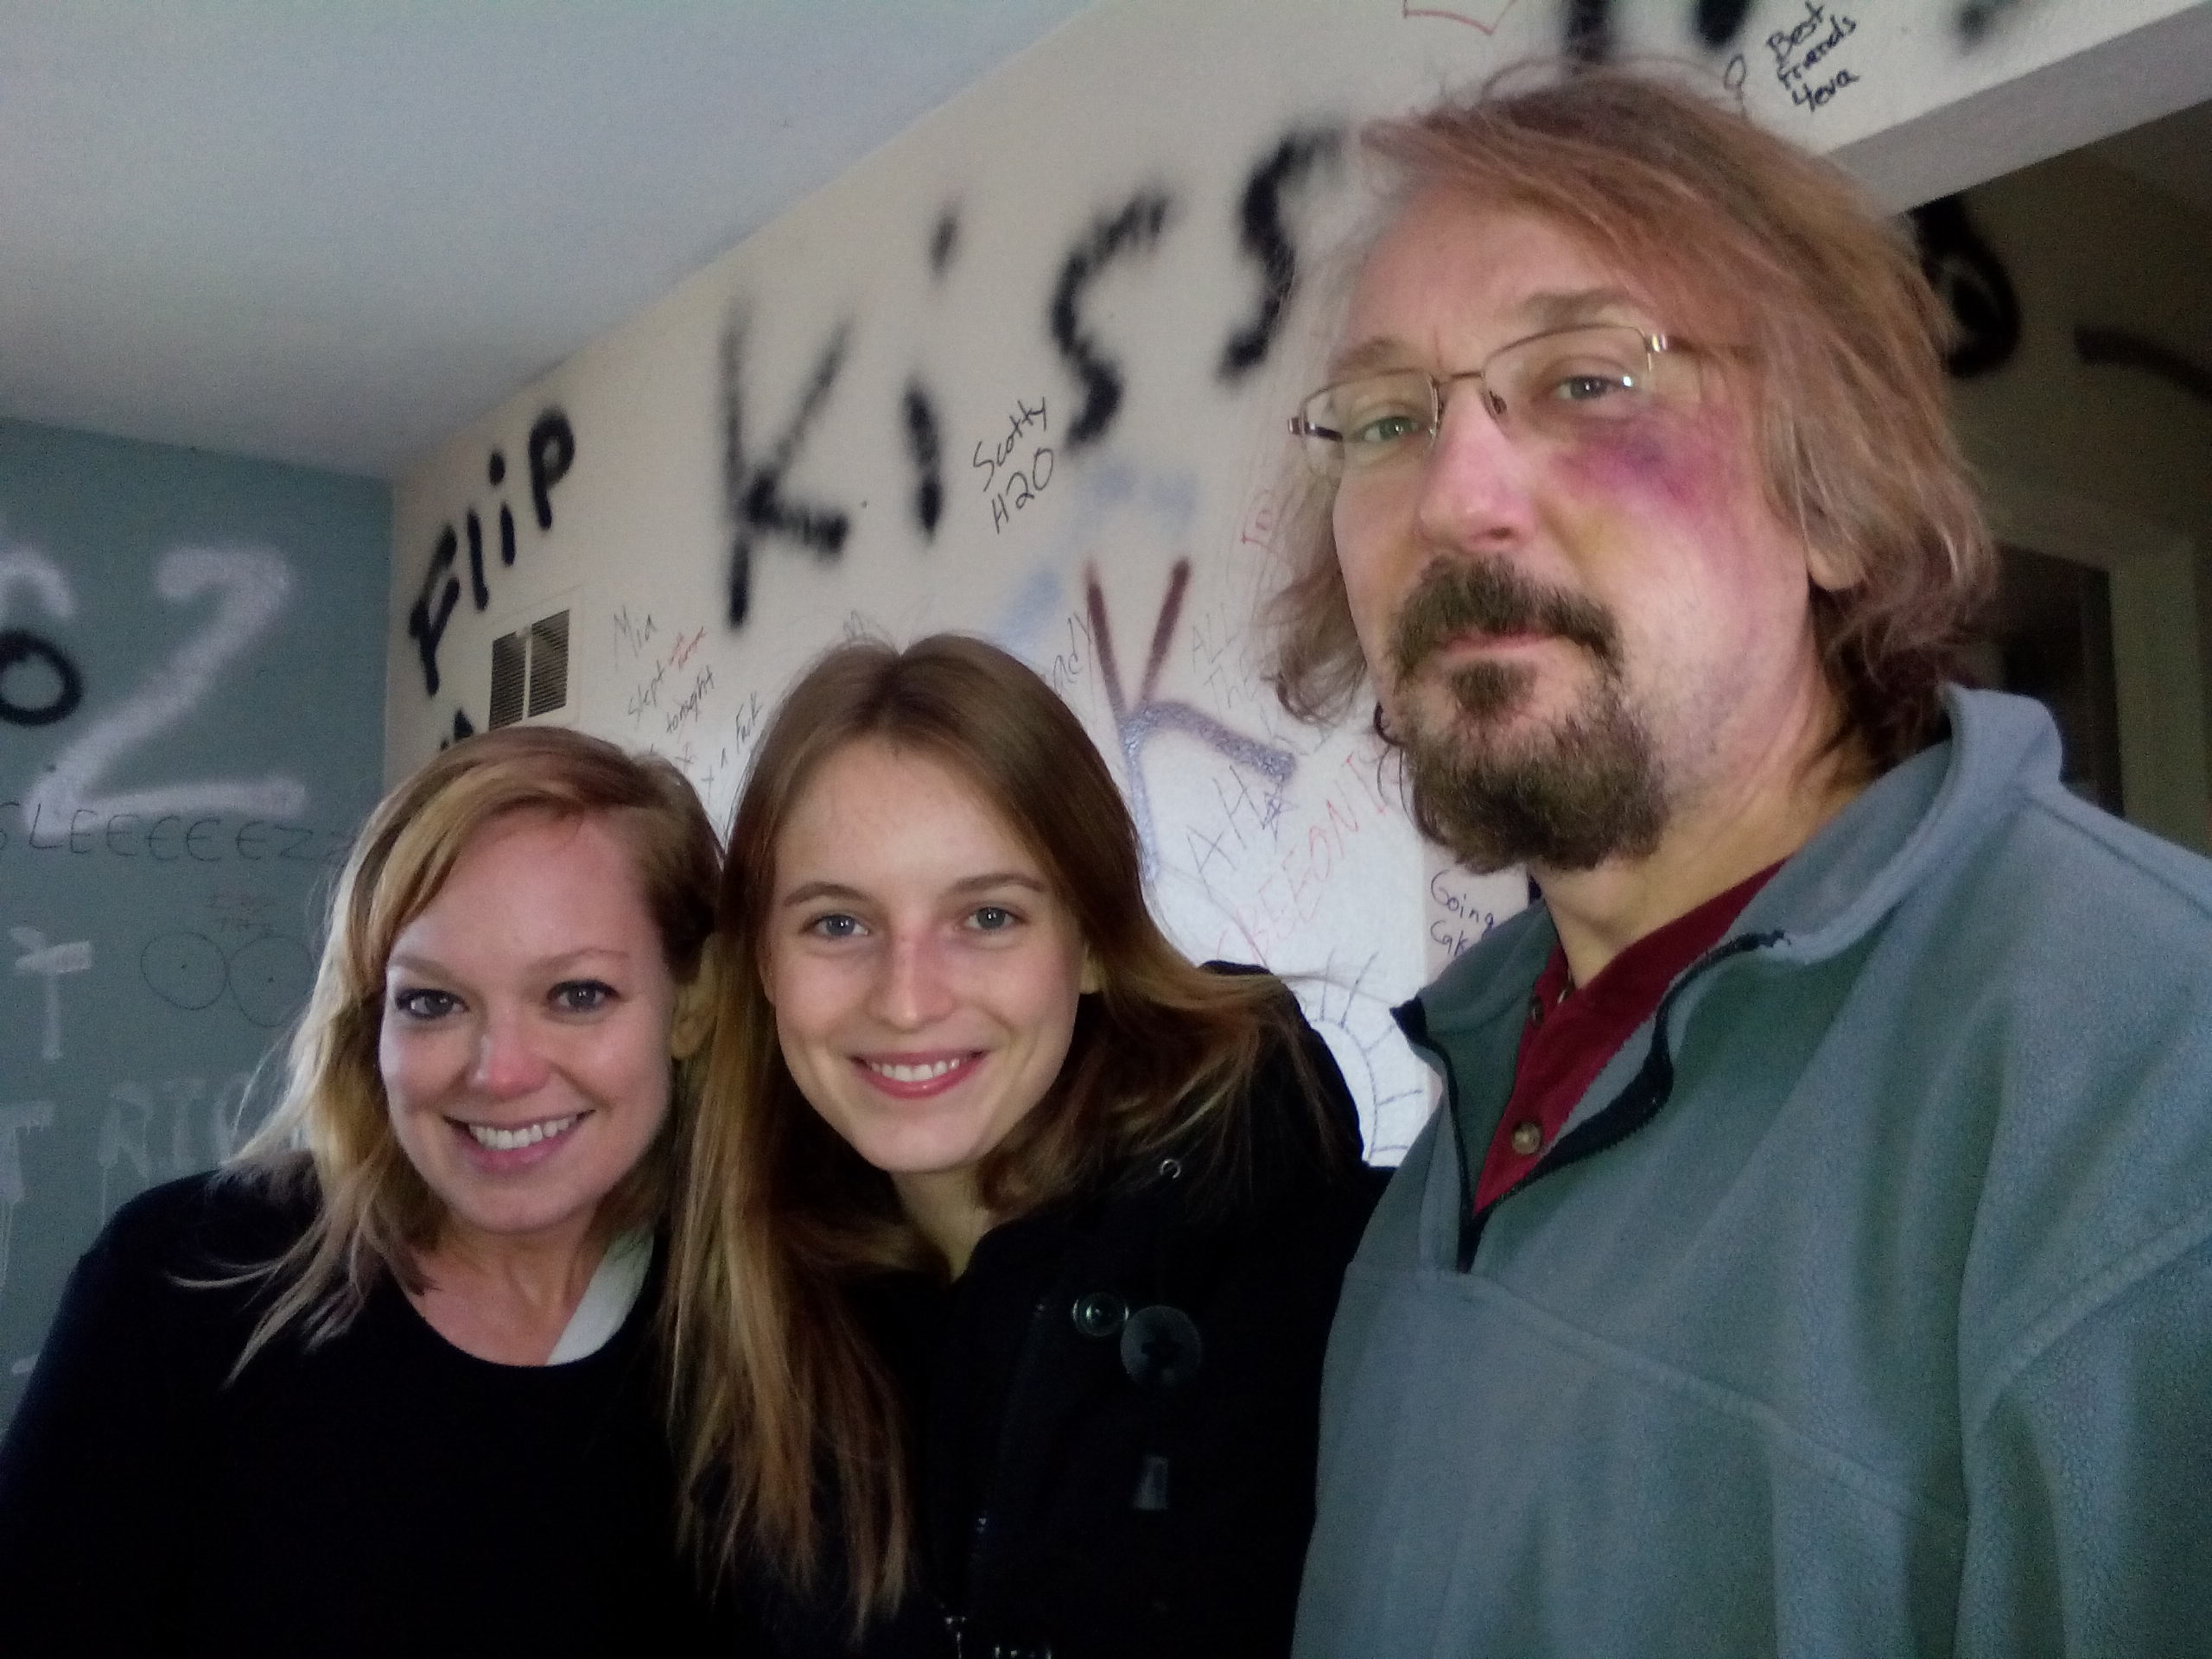 Actresses Abby Wathen and Ella-Maria Gollmer on set with John in St. Louis for UABRS film